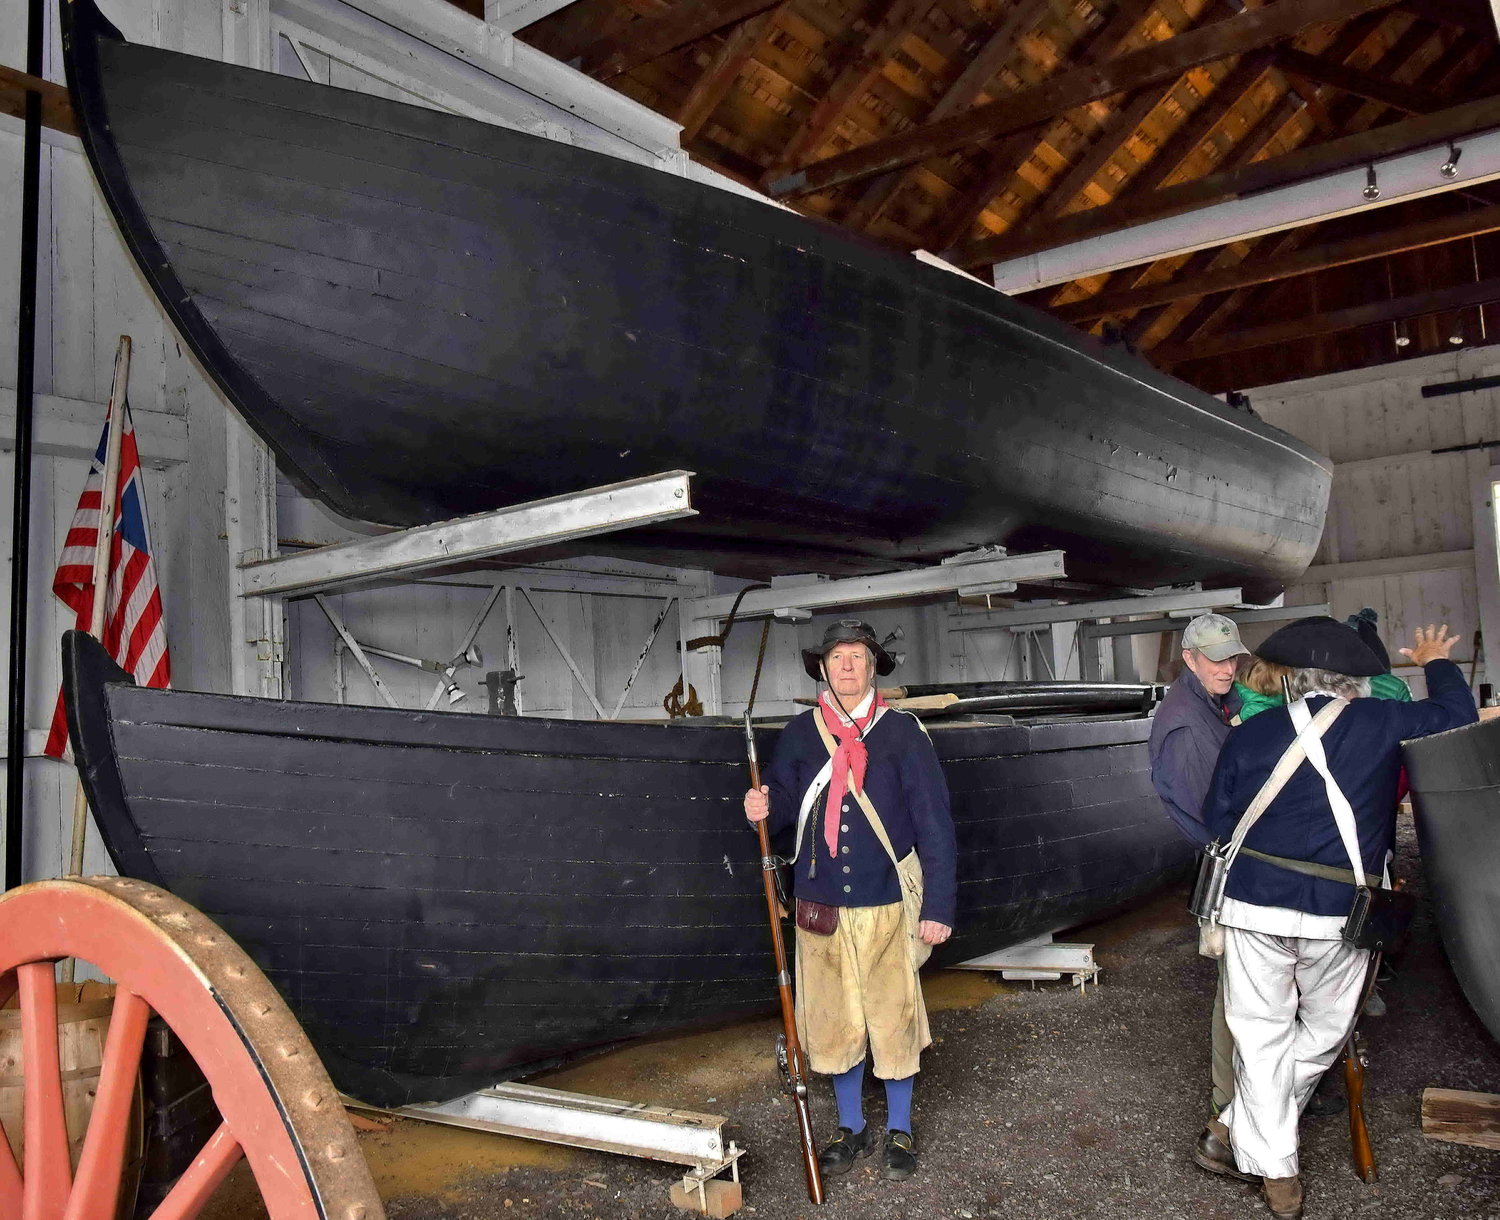 Paul Beck stands next to Durham boats, copies of the original boats used by George Washington to cross the Delaware.